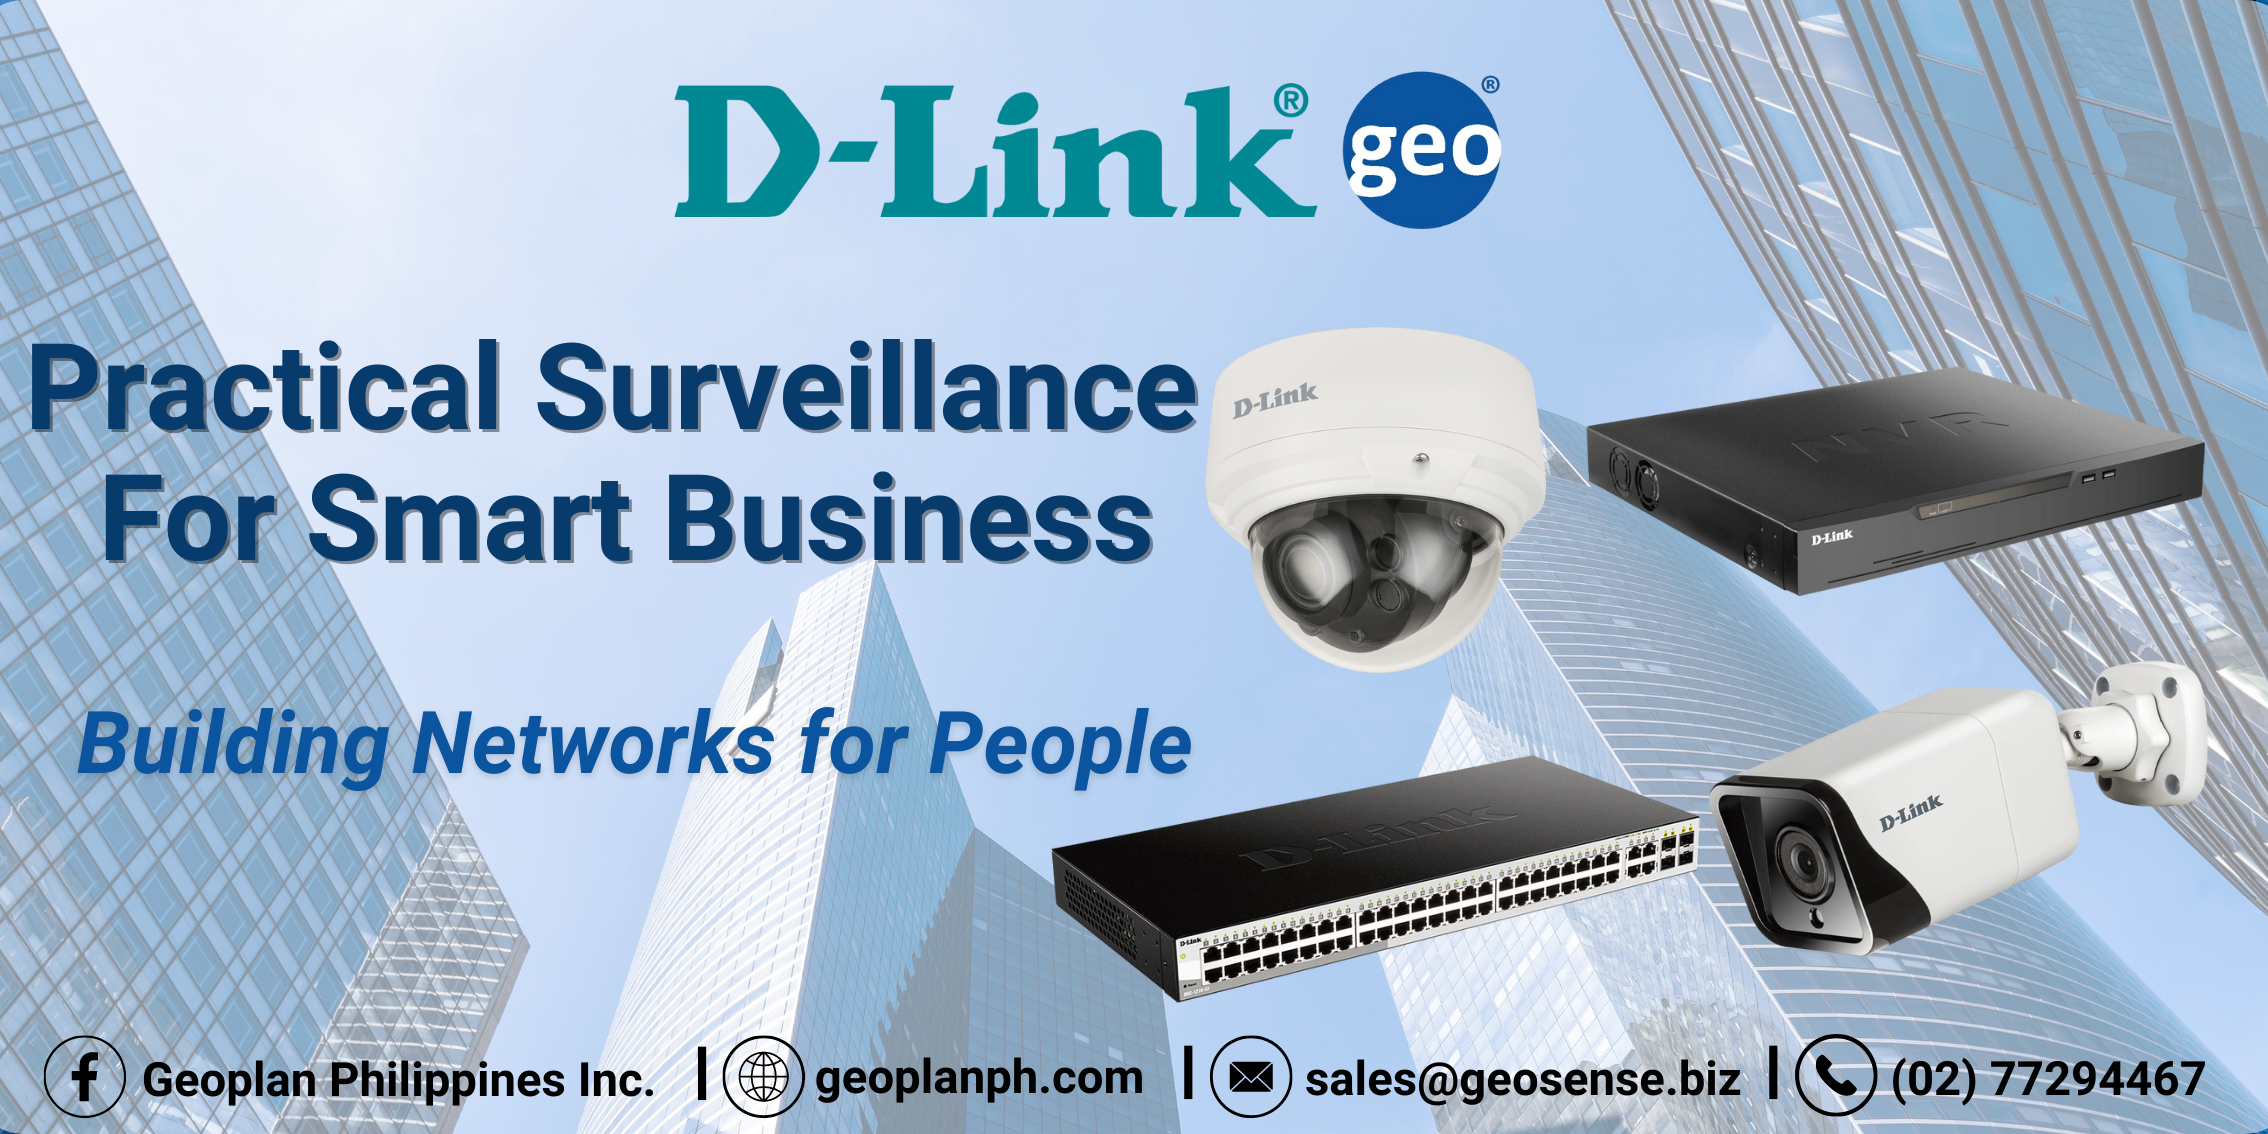 D-Link: The Practical Surveillance System You Need